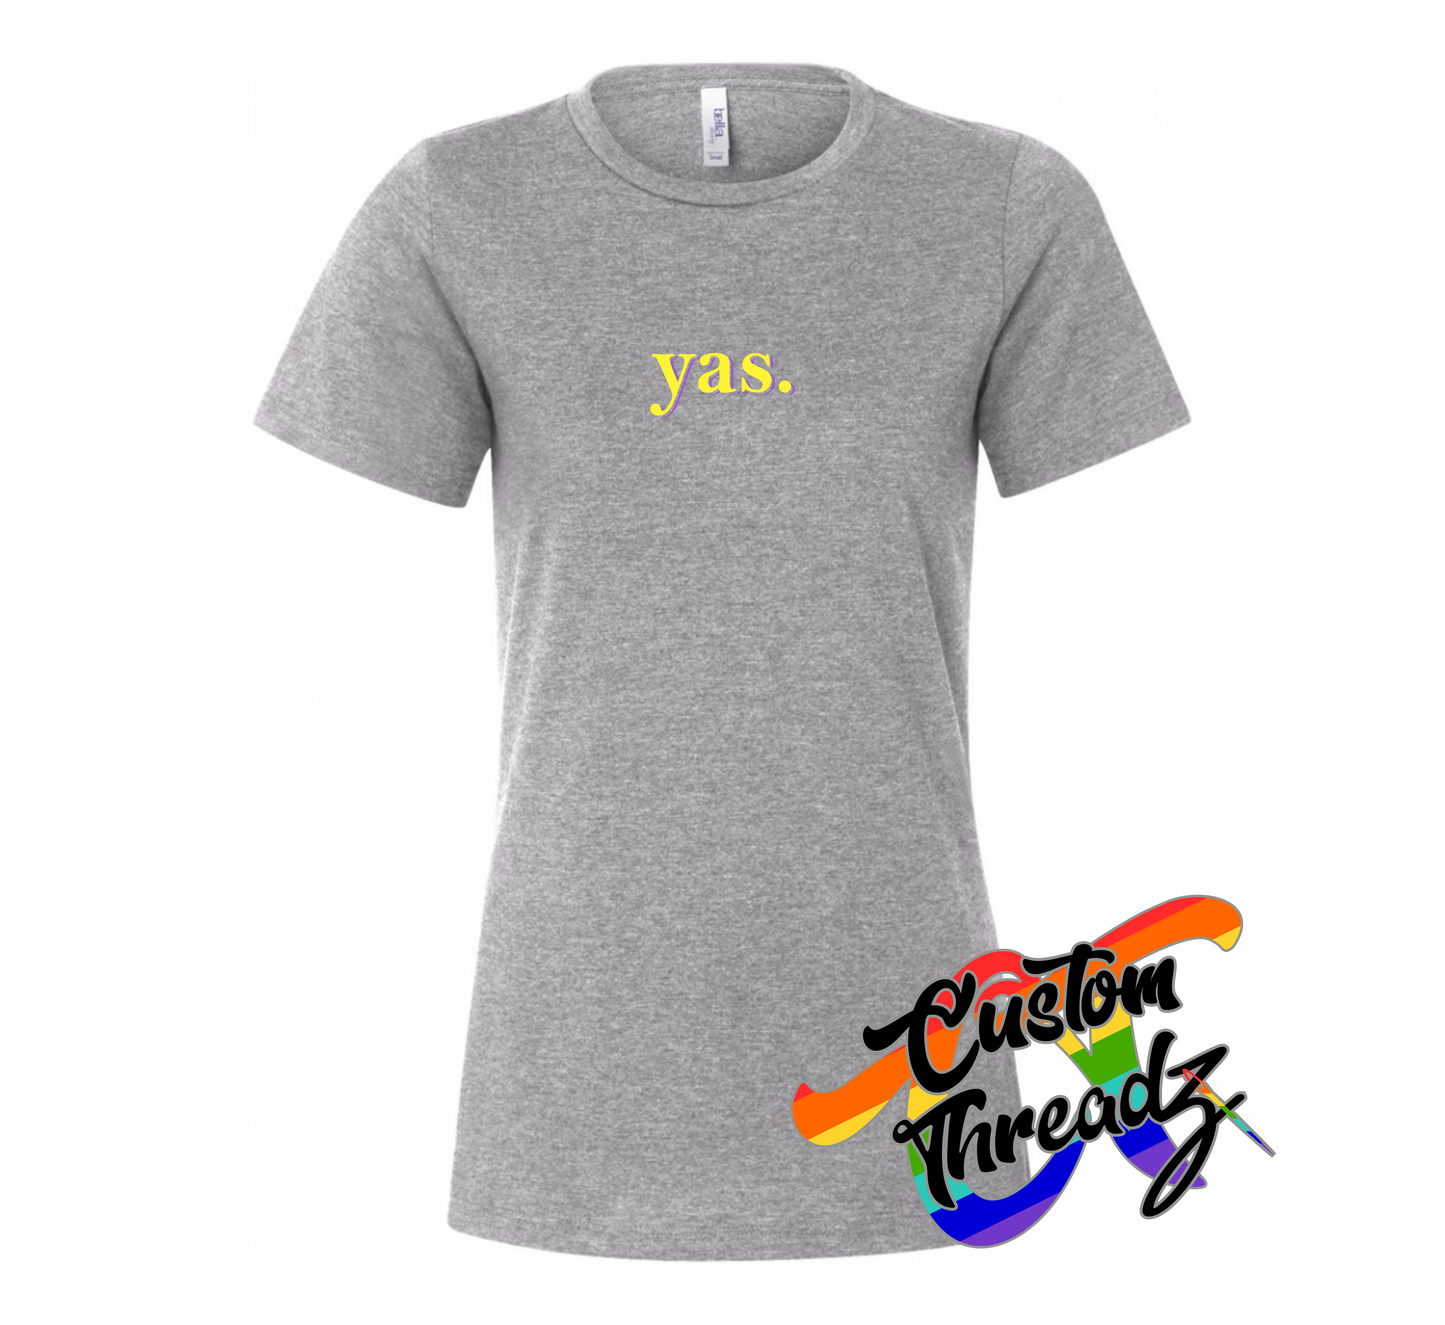 athletic heather grey womens tee with yas DTG printed design